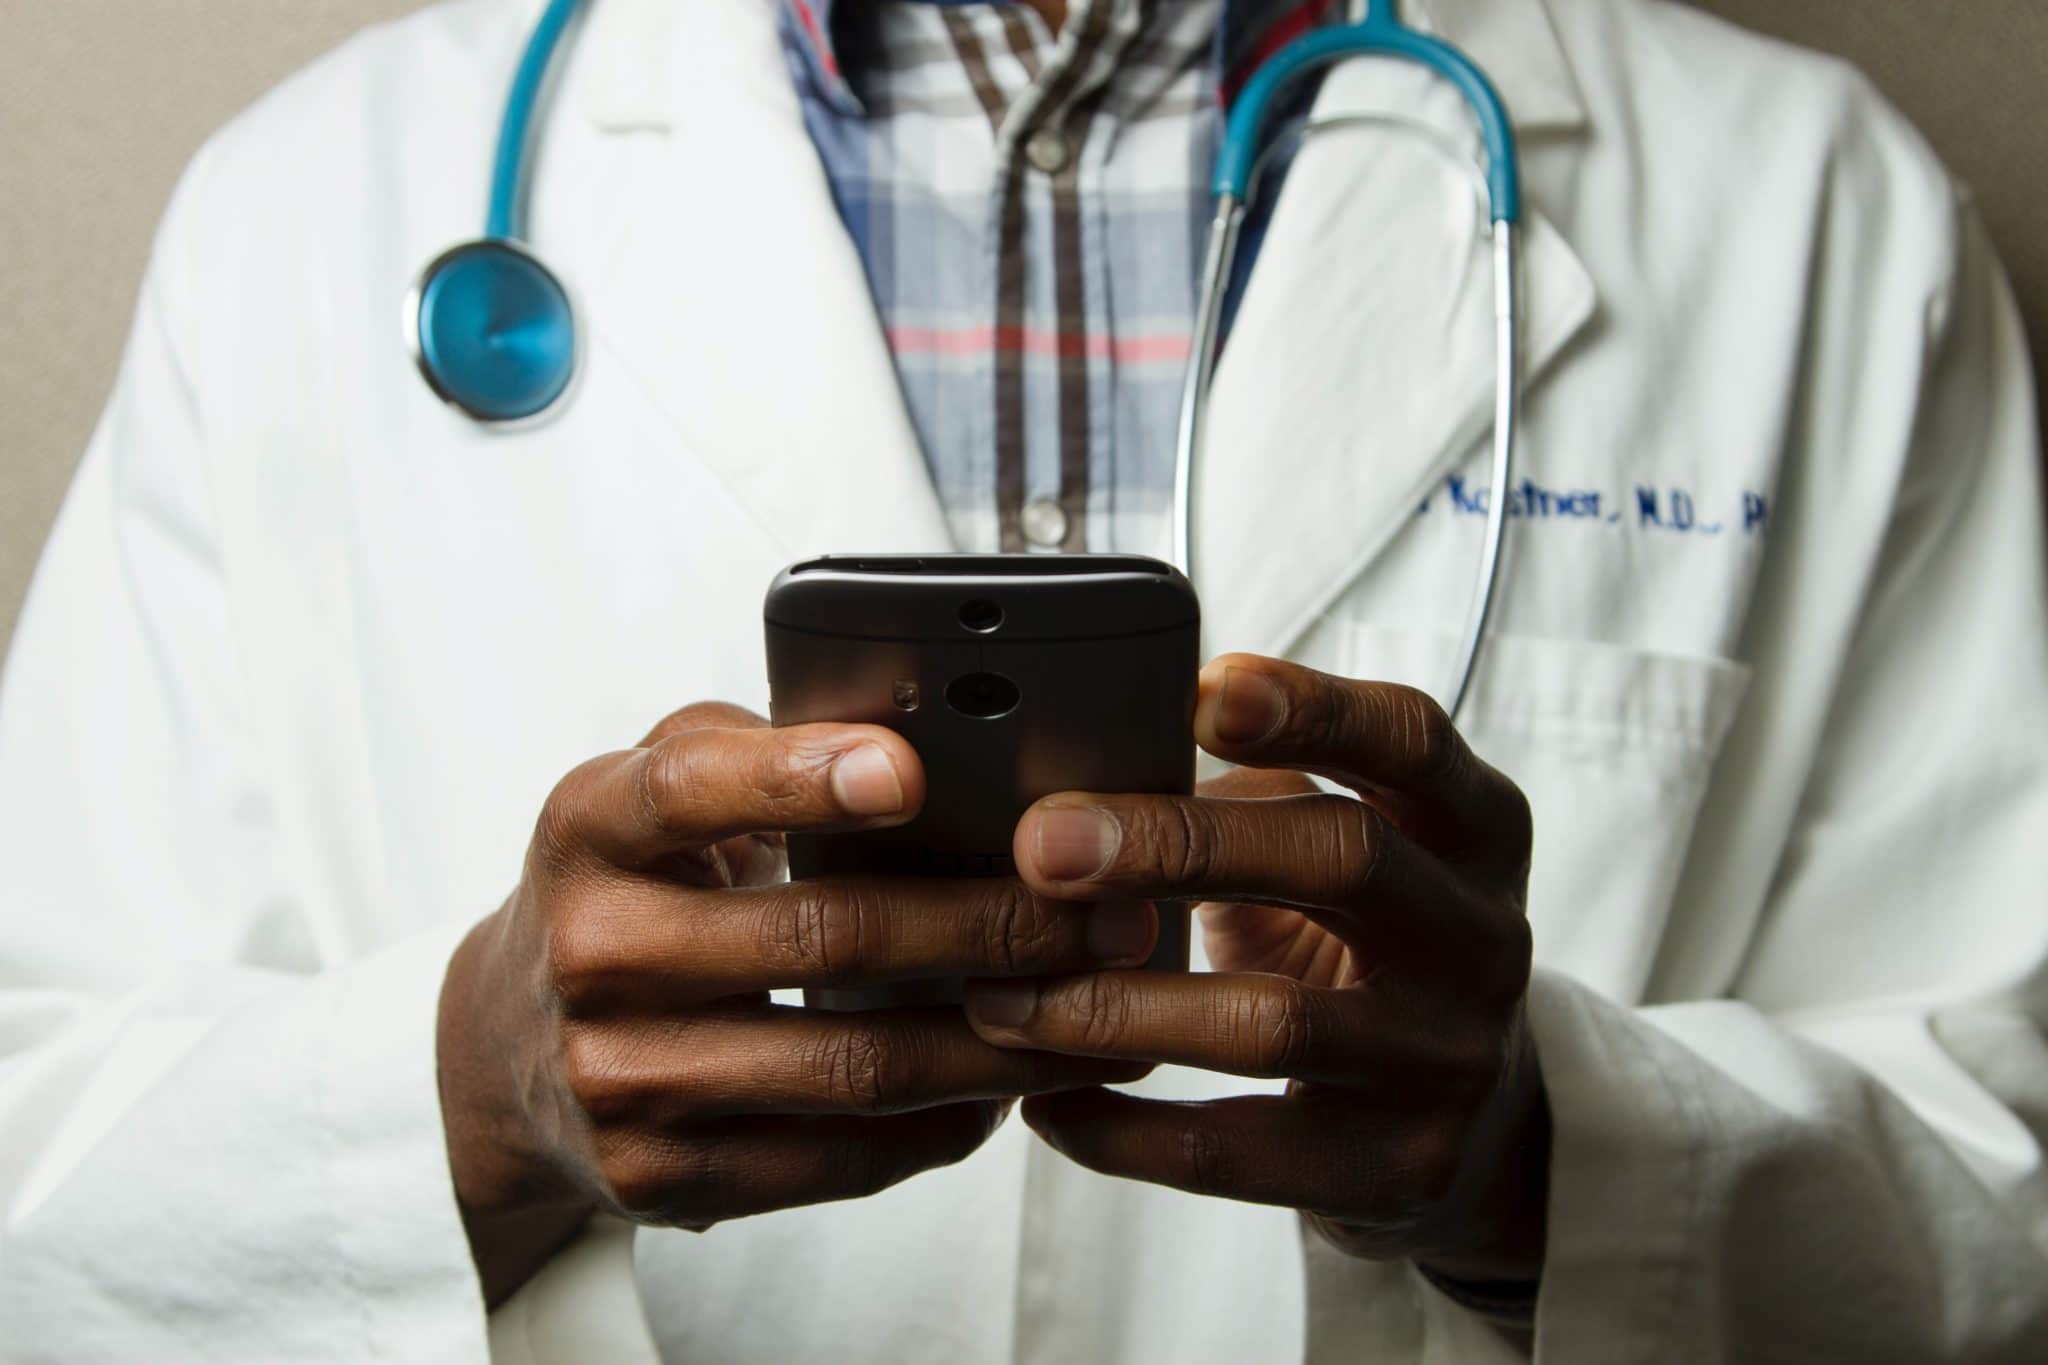 photo of the torso of a person in a white coat with a stethoscope around their neck, holding a cell phone